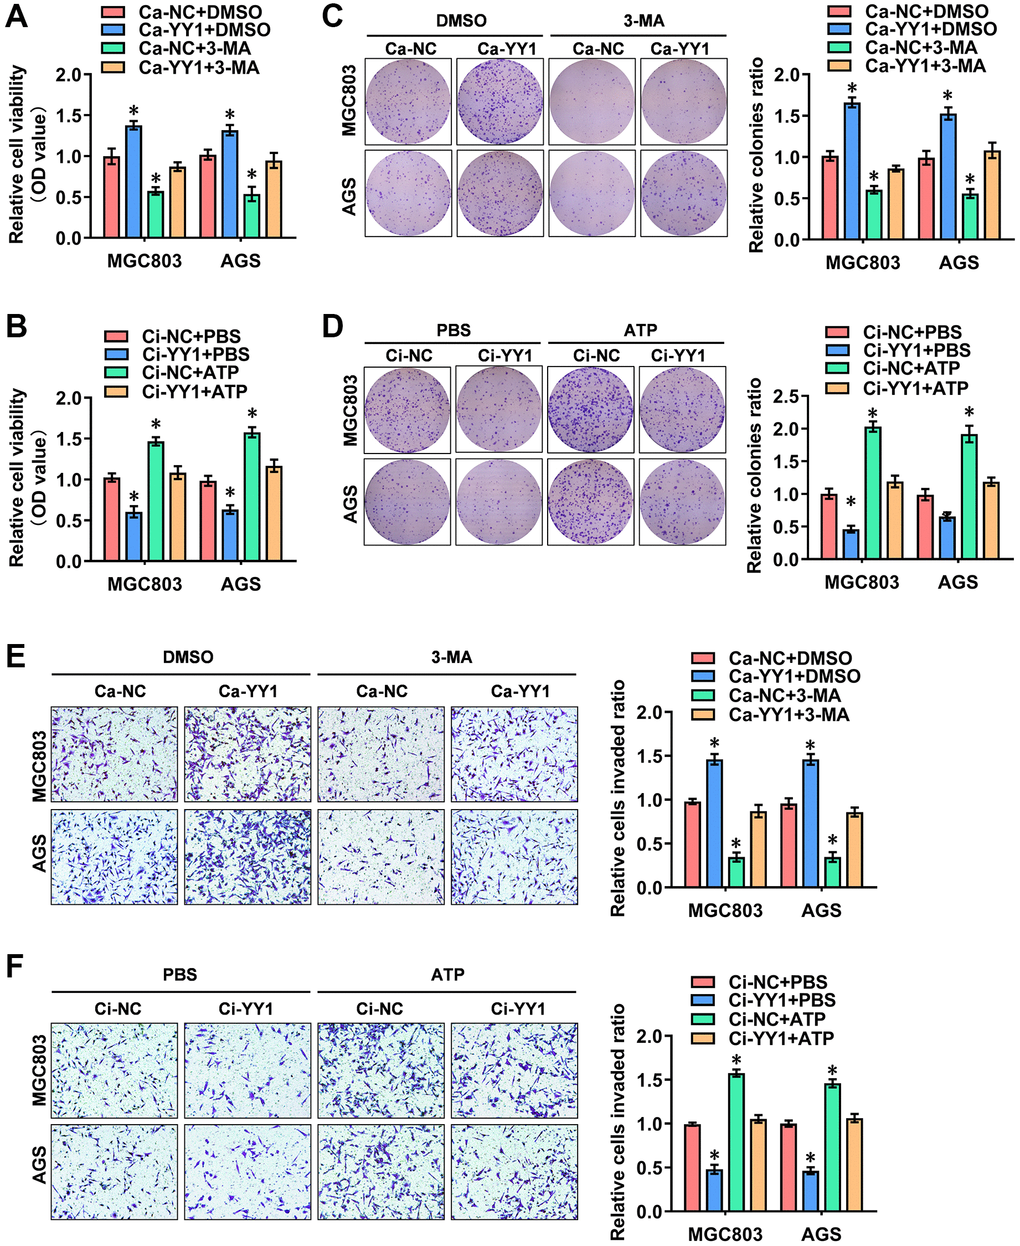 YY1 promotes cancer progression through autophagy enhancement. (A, B) The in vitro CCK-8 assay of AGS and MGC803 cells stably transfected with Ca-NC, Ca-YY1, Ci-NC or Ci-YY1 and those treated with DMSO, 3-MA (1.0 μM), PBS or ATP (0.1 mM). (C–F) Representative images (left) and the quantification (right) of colony formation (C, D) and transwell (E, F) assays showing the growth and migration of GC cells transfected with Ca-NC, Ca-YY1, Ci-NC or Ci-YY1 and those treated with 3-MA (1.0 μM) or ATP (0.1 mM). *P 